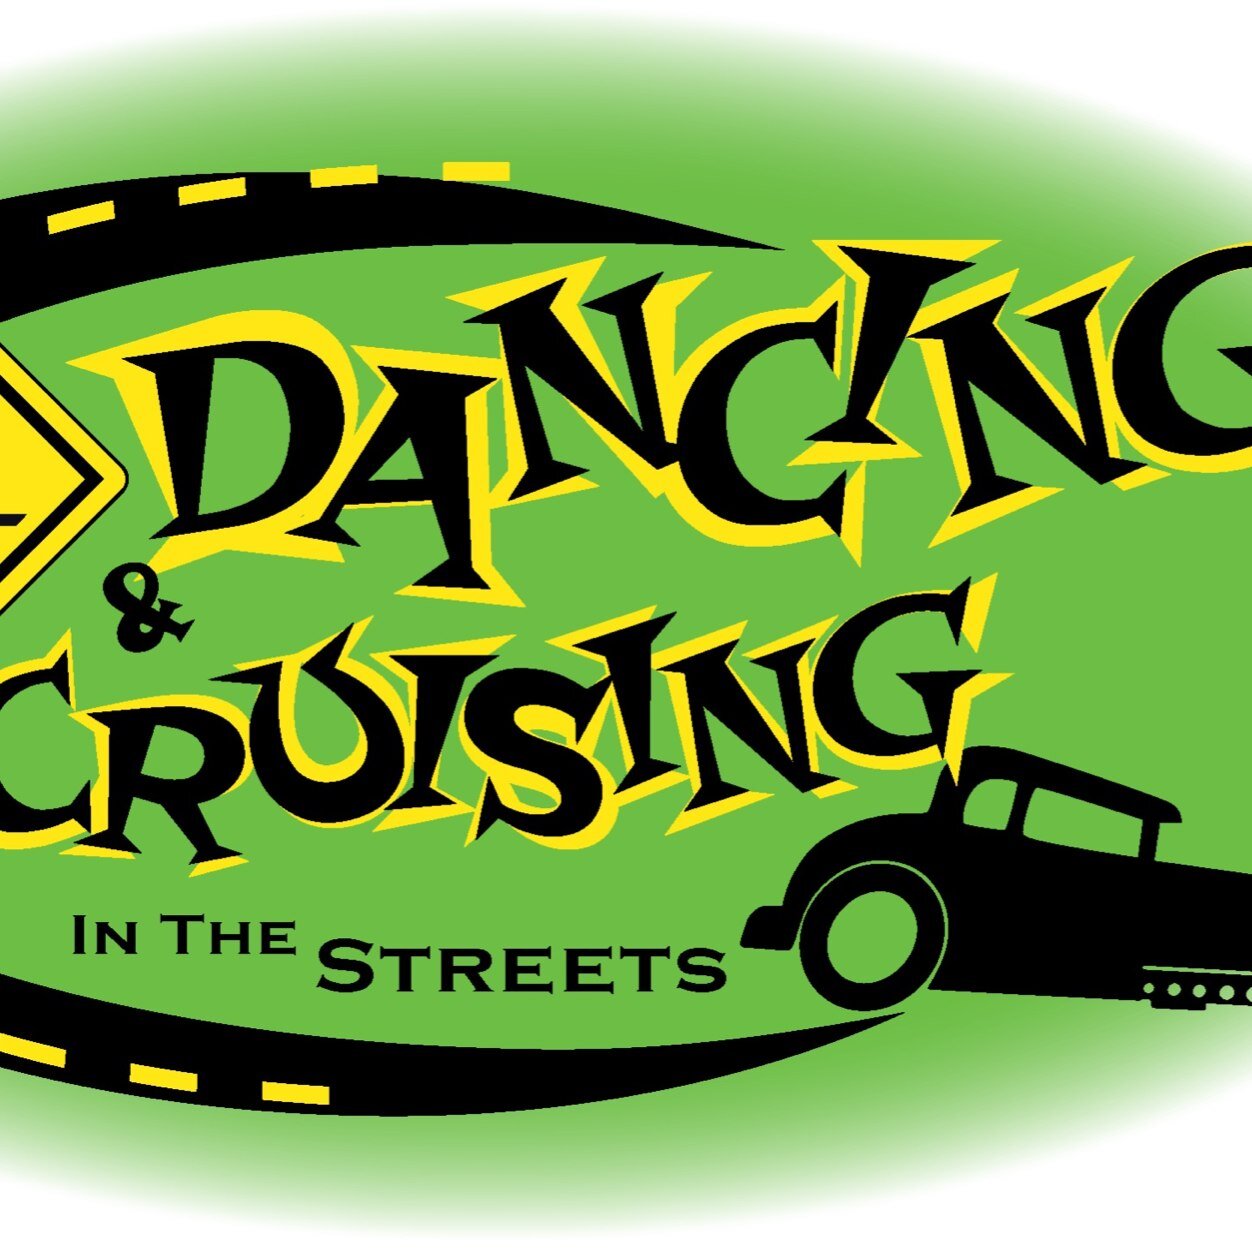 Dancing In The Streets is held the 3rd Saturday every July in Lafayette/West Lafayette. Are you dancing?